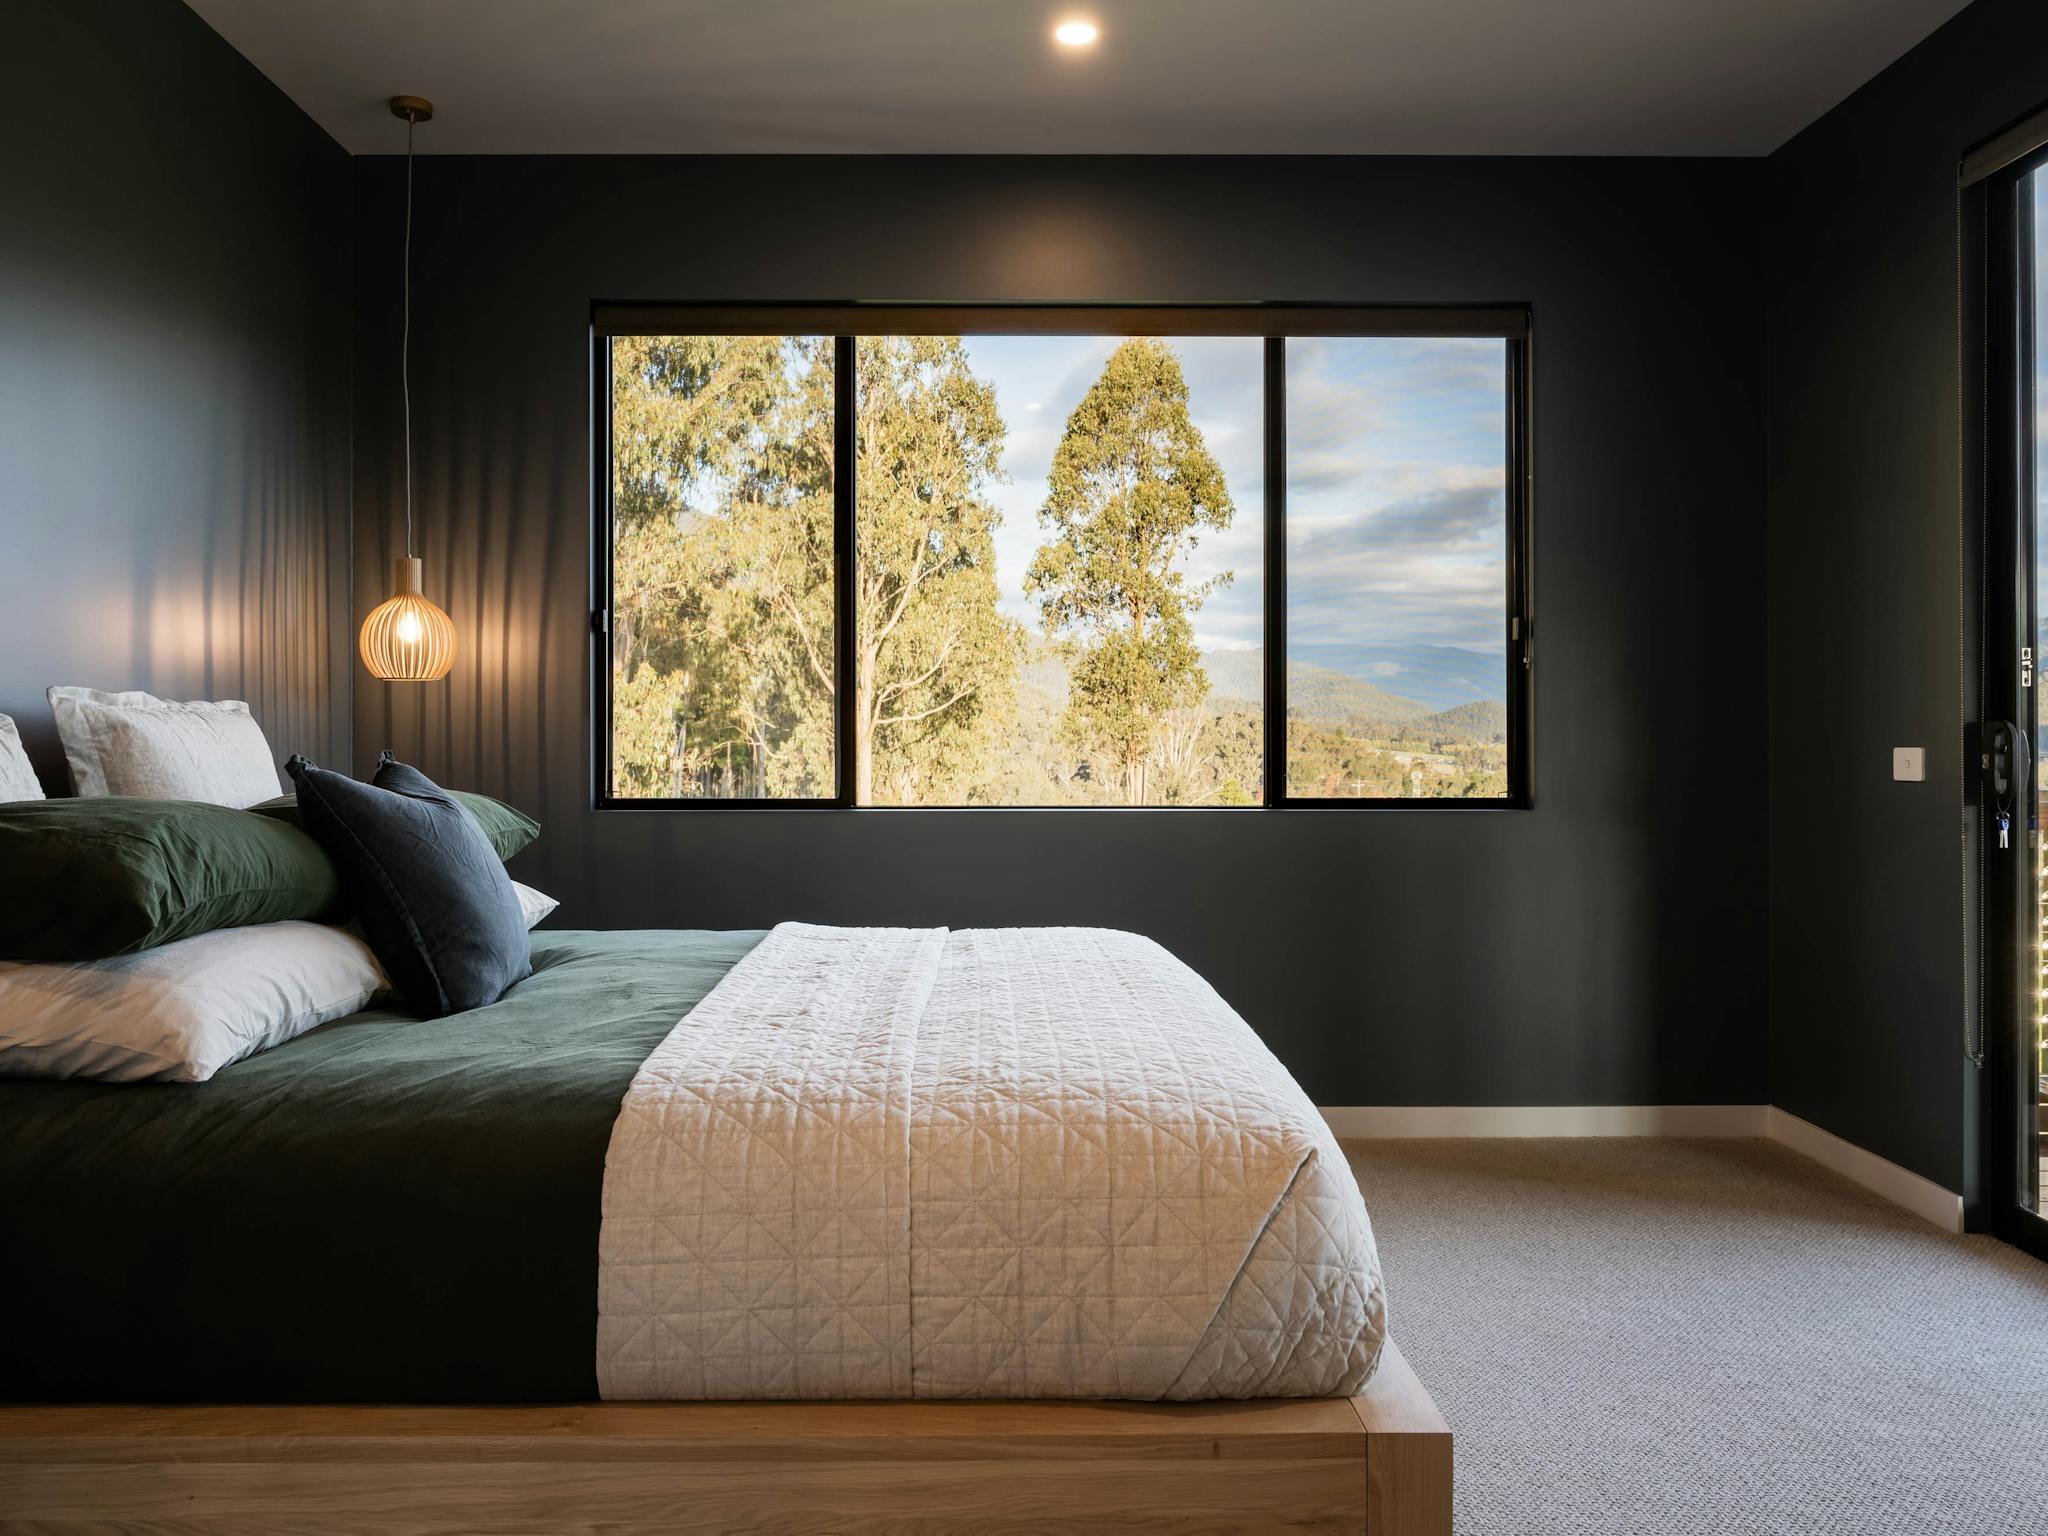 Large master bed with mountain views and door opening onto veranda